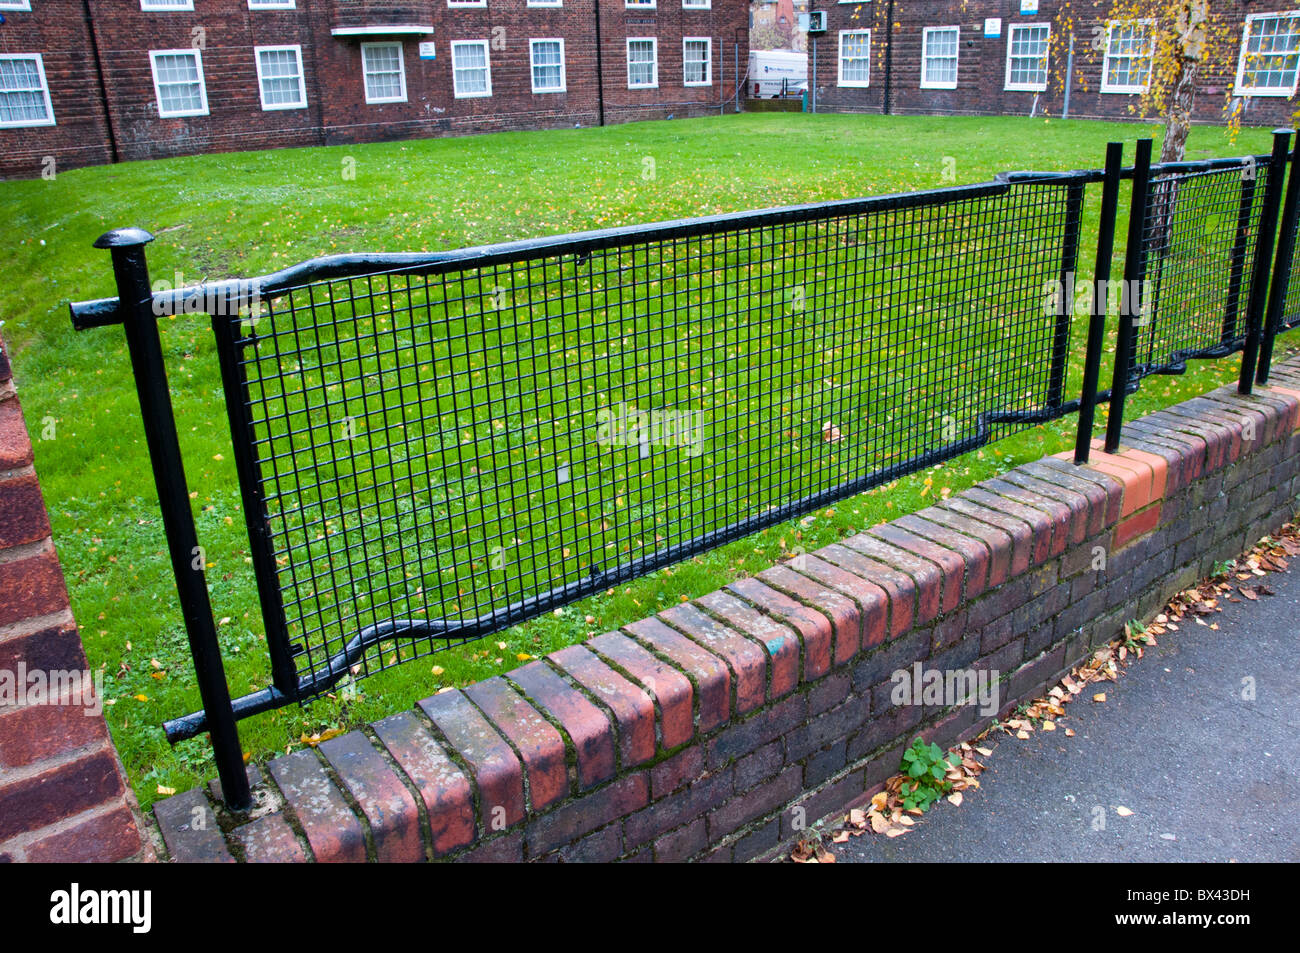 Second World War stretchers recycled as fences - SEE DESCRIPTION FOR ...